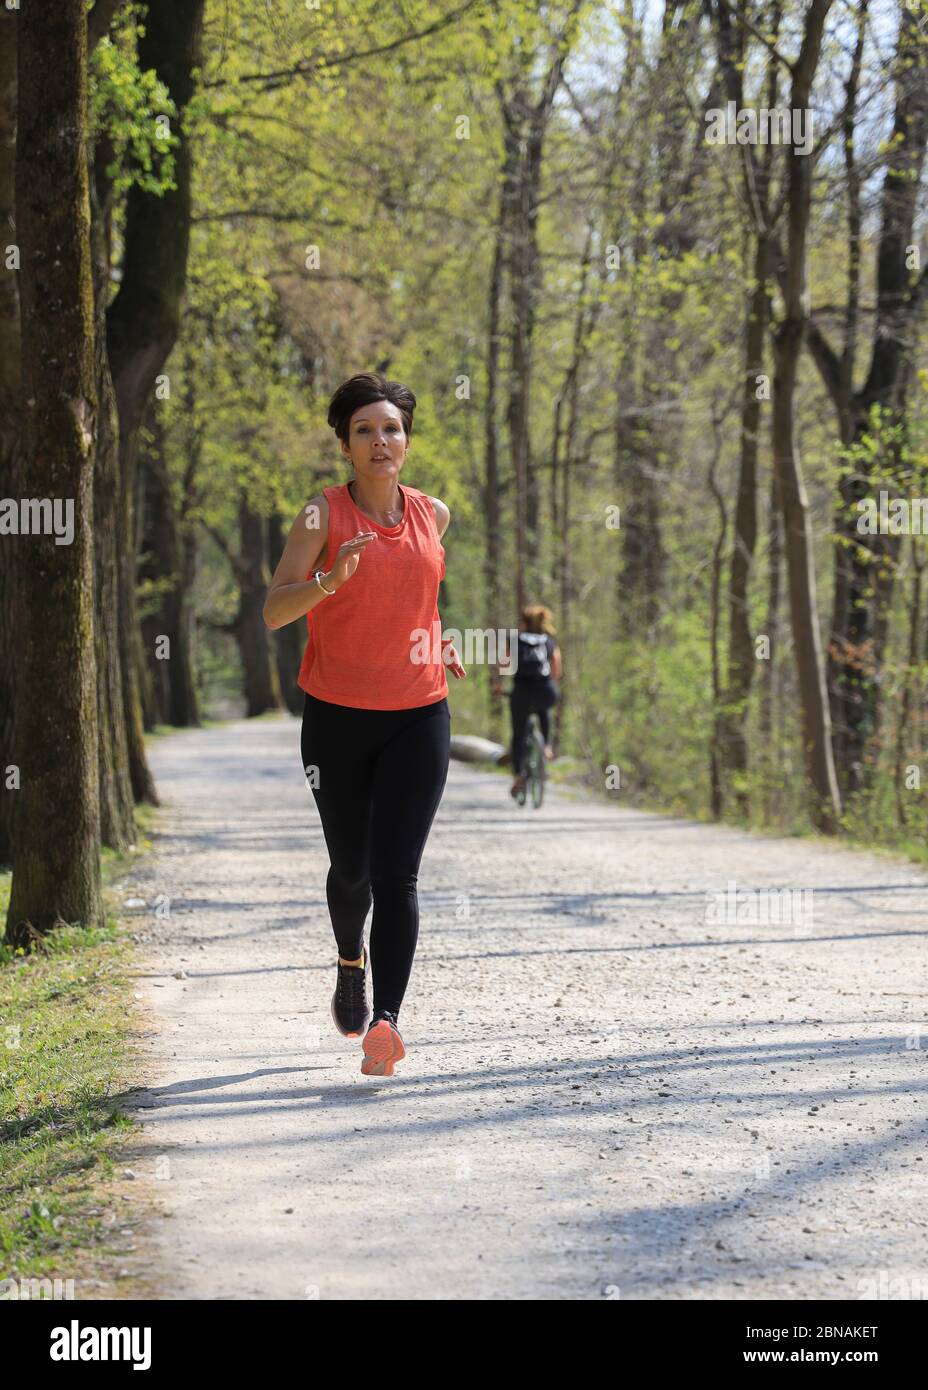 Woman, 40-45 years old, jogging in a forest area in Munich, Bavaria, Germany. Stock Photo